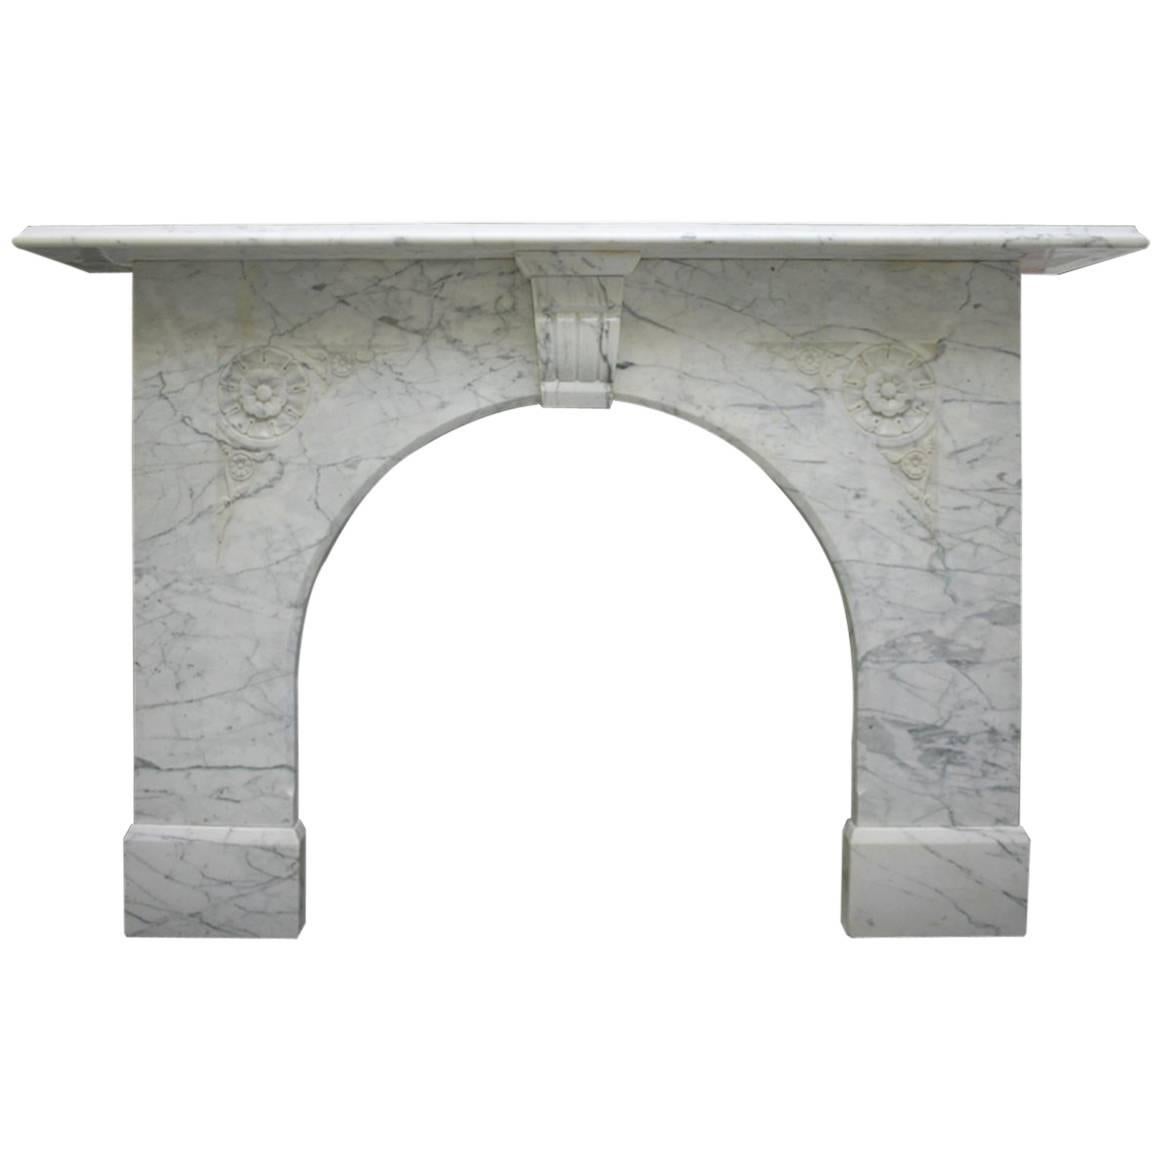 Antique Victorian White Carrara Arched Marble Fireplace Surround